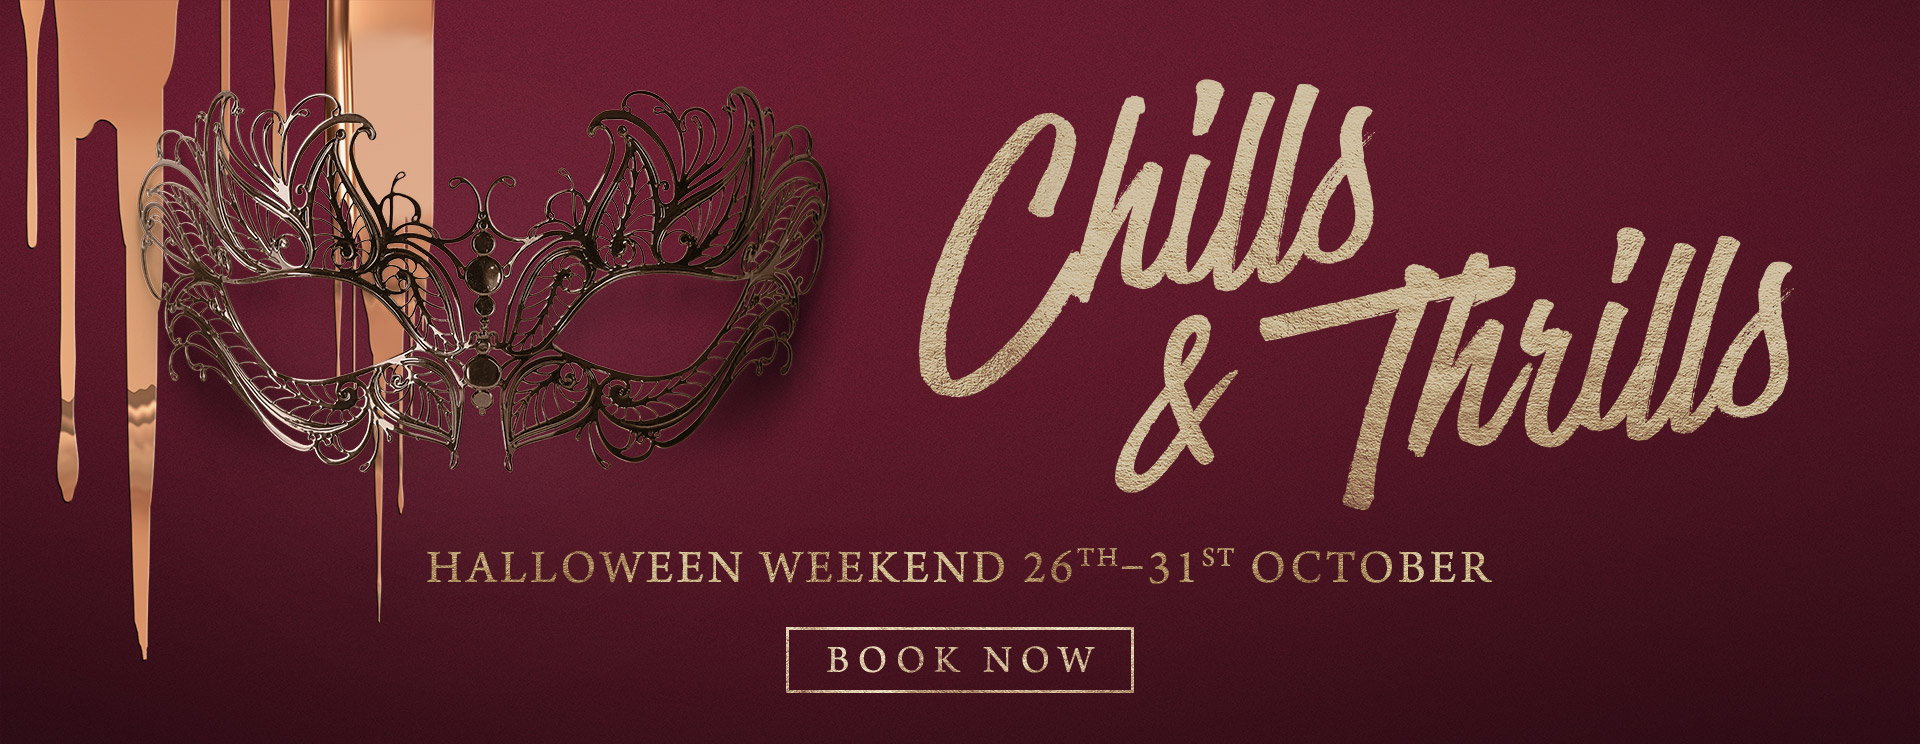 Chills & Thrills this Halloween at The Plough